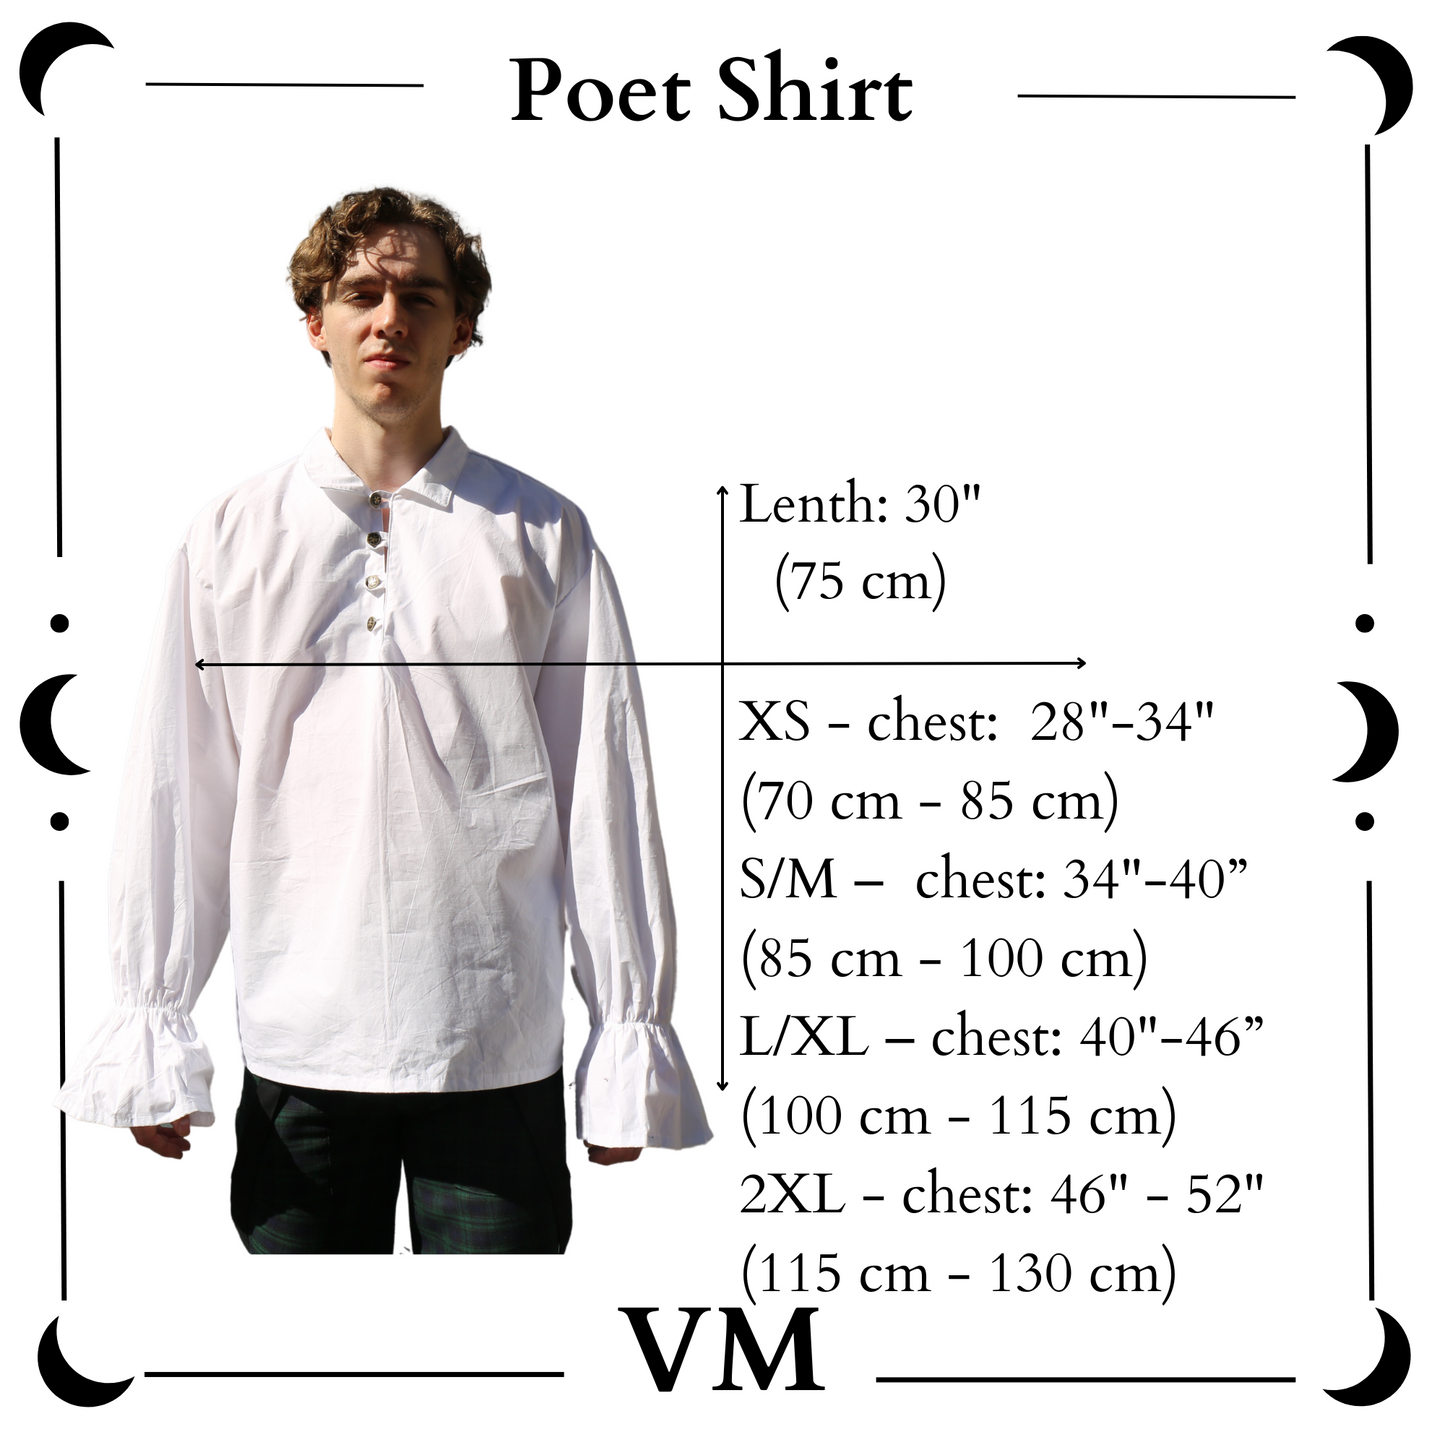 The VM Lace-Up Poet Shirt